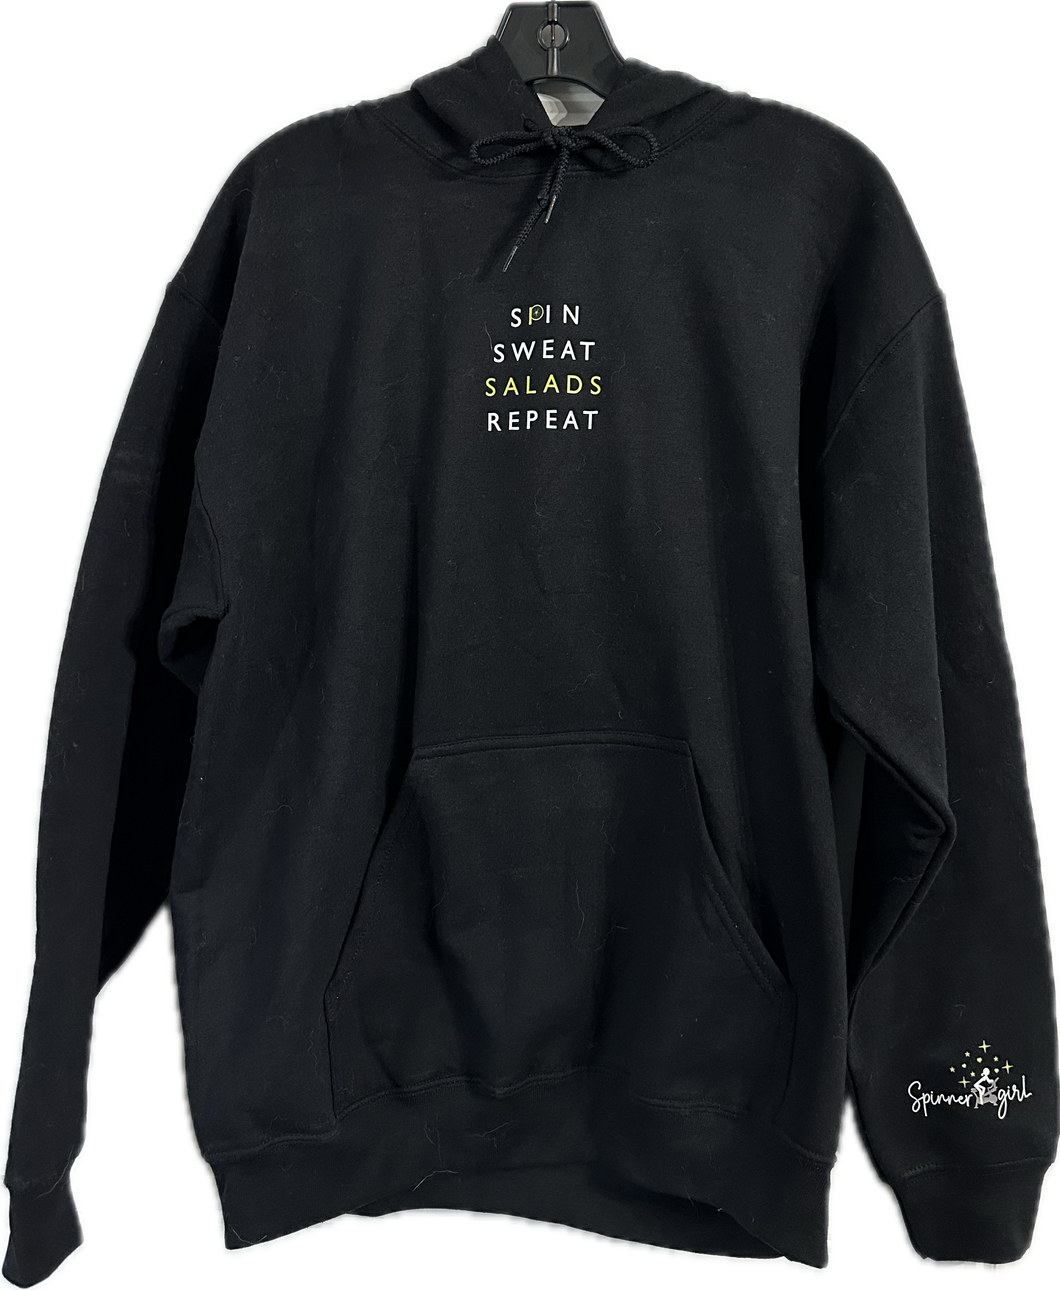 Spin Sweat Salads Repeat Hoodie